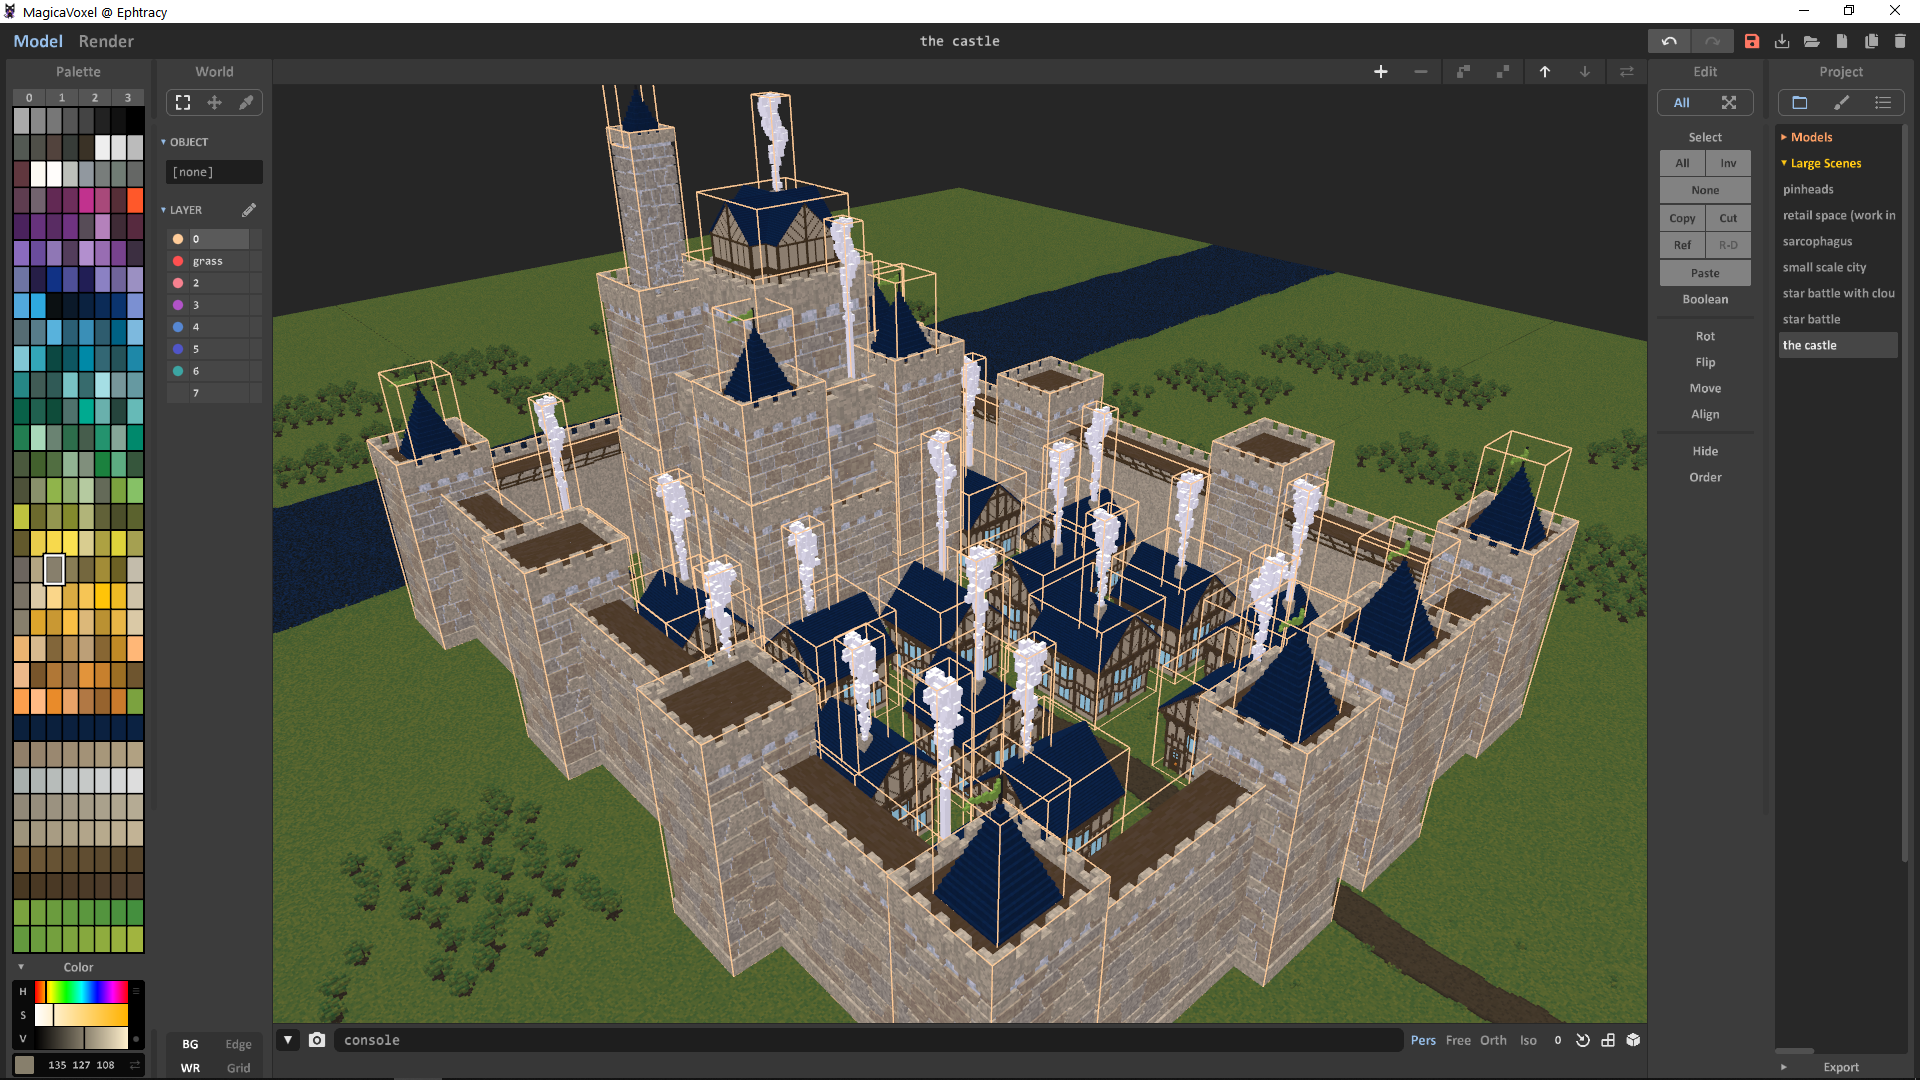 MagicaVoxel’s world editor, where you can assemble many objects to form a larger scene.